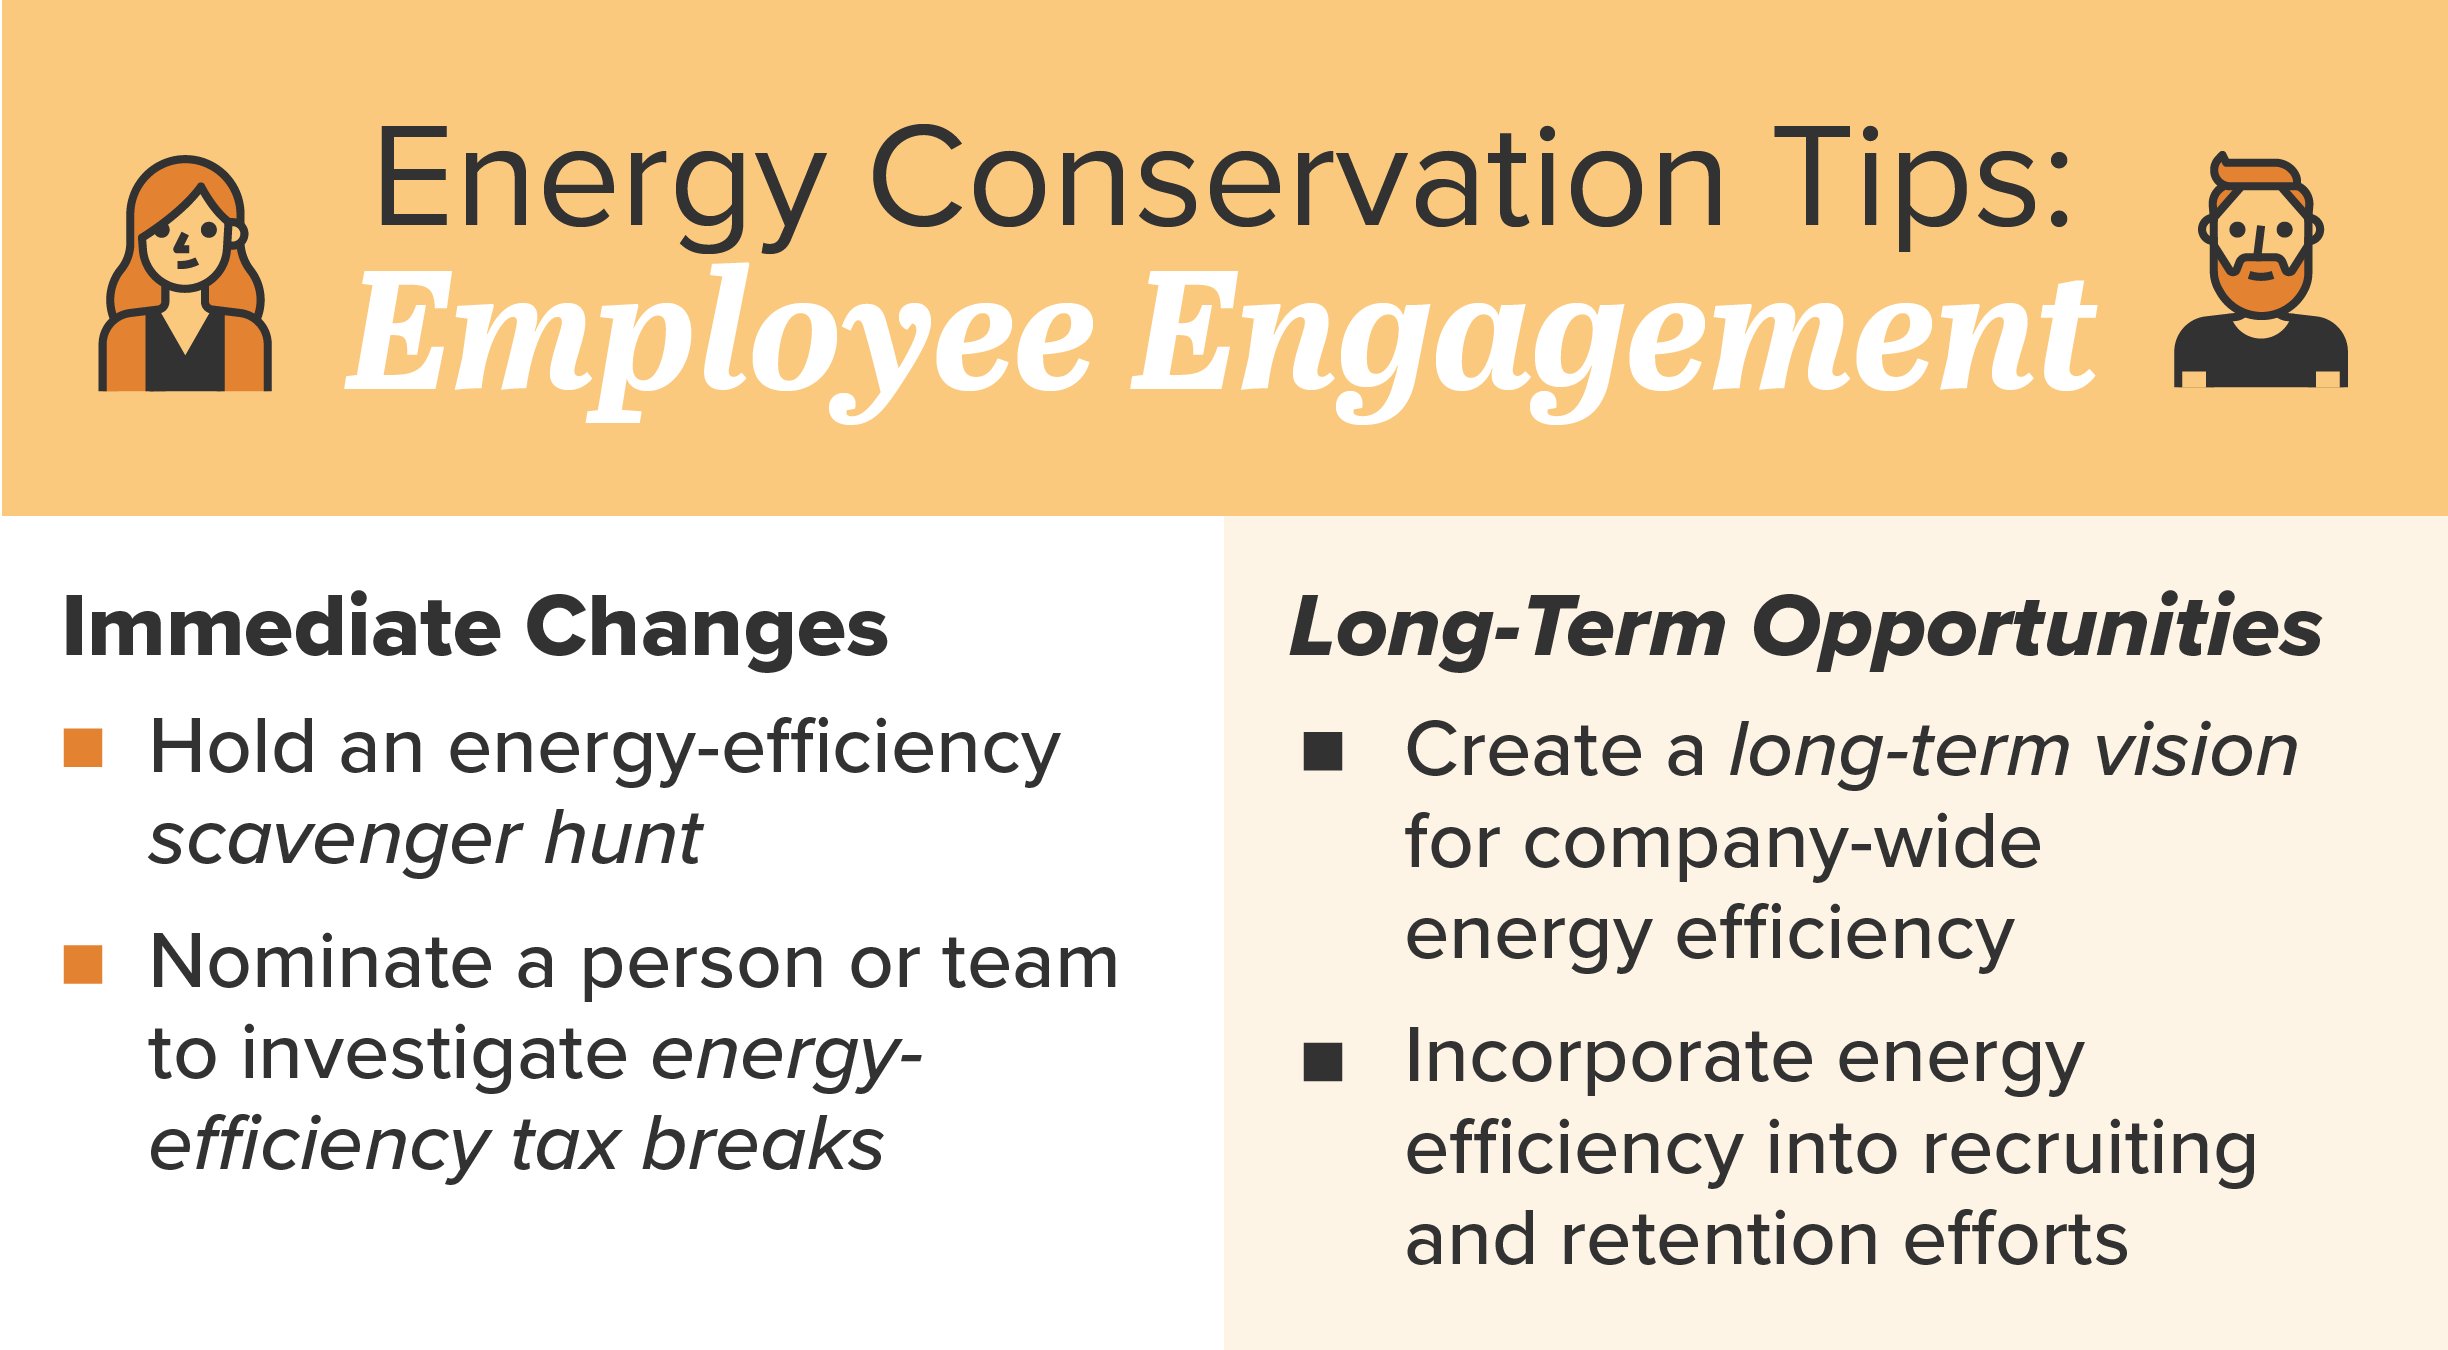 Employee engagement conservation tips